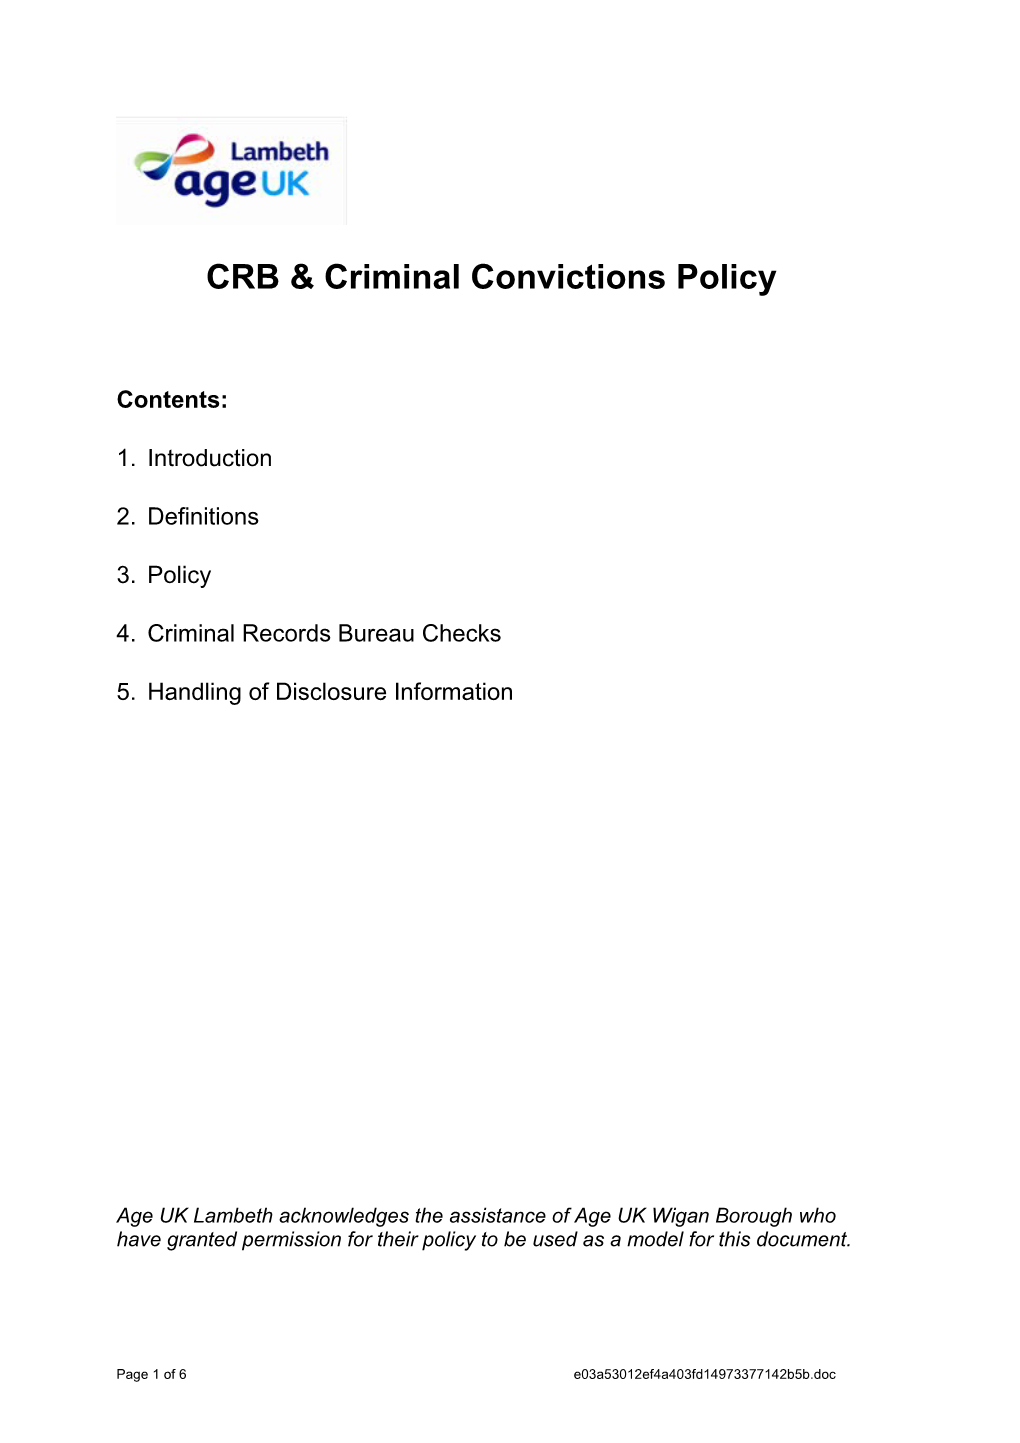 CRB Criminal Convictions Policy